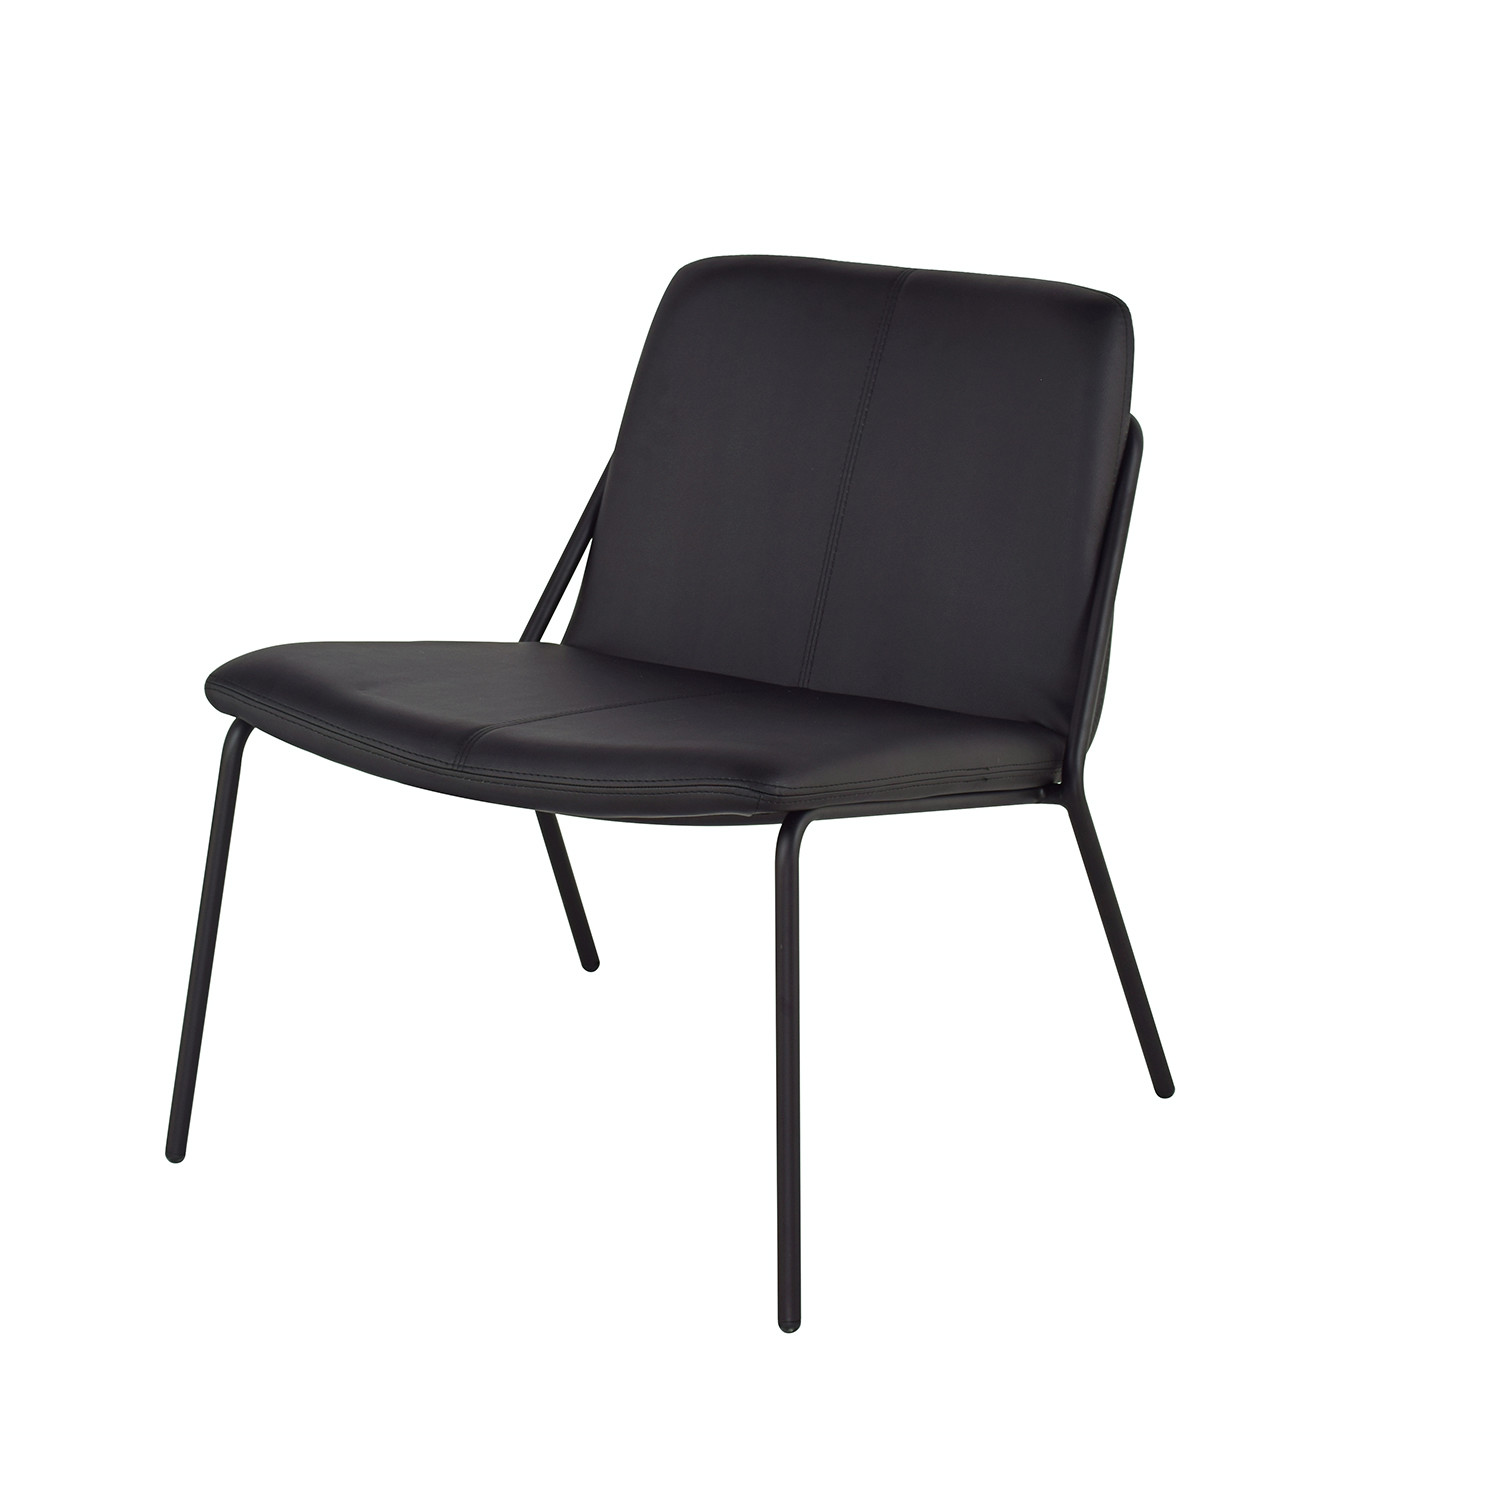 Sling Lounge Chair - M.A.D. Furniture - Touch of Modern